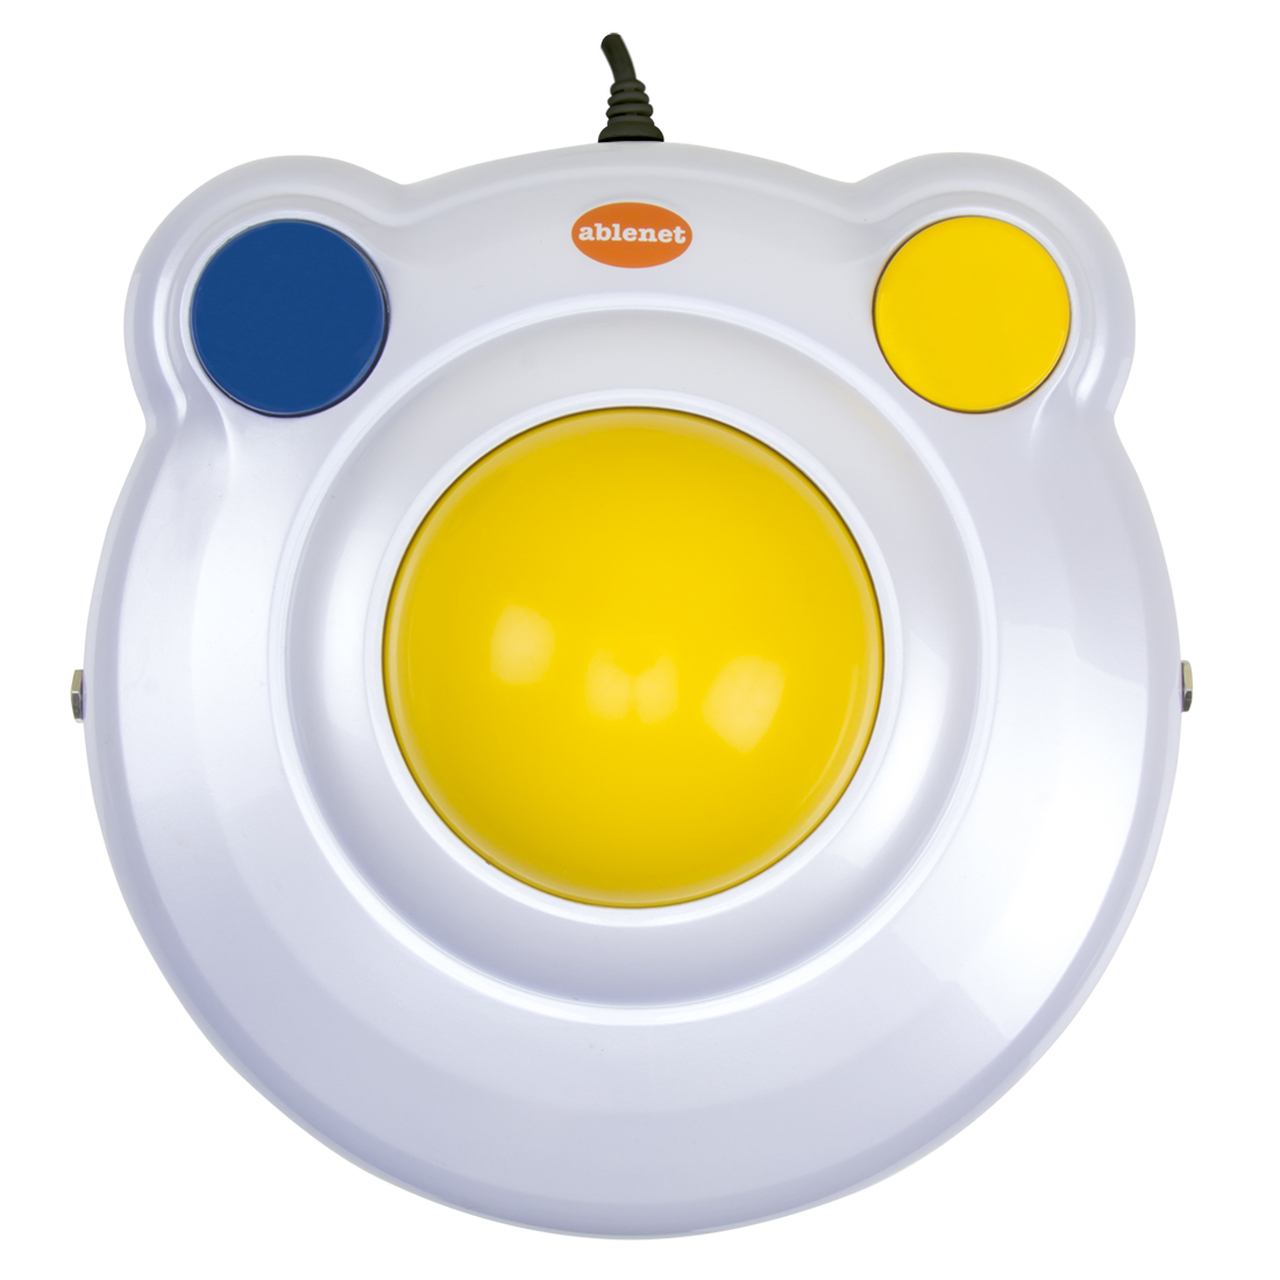 BigTrack trackball mouse